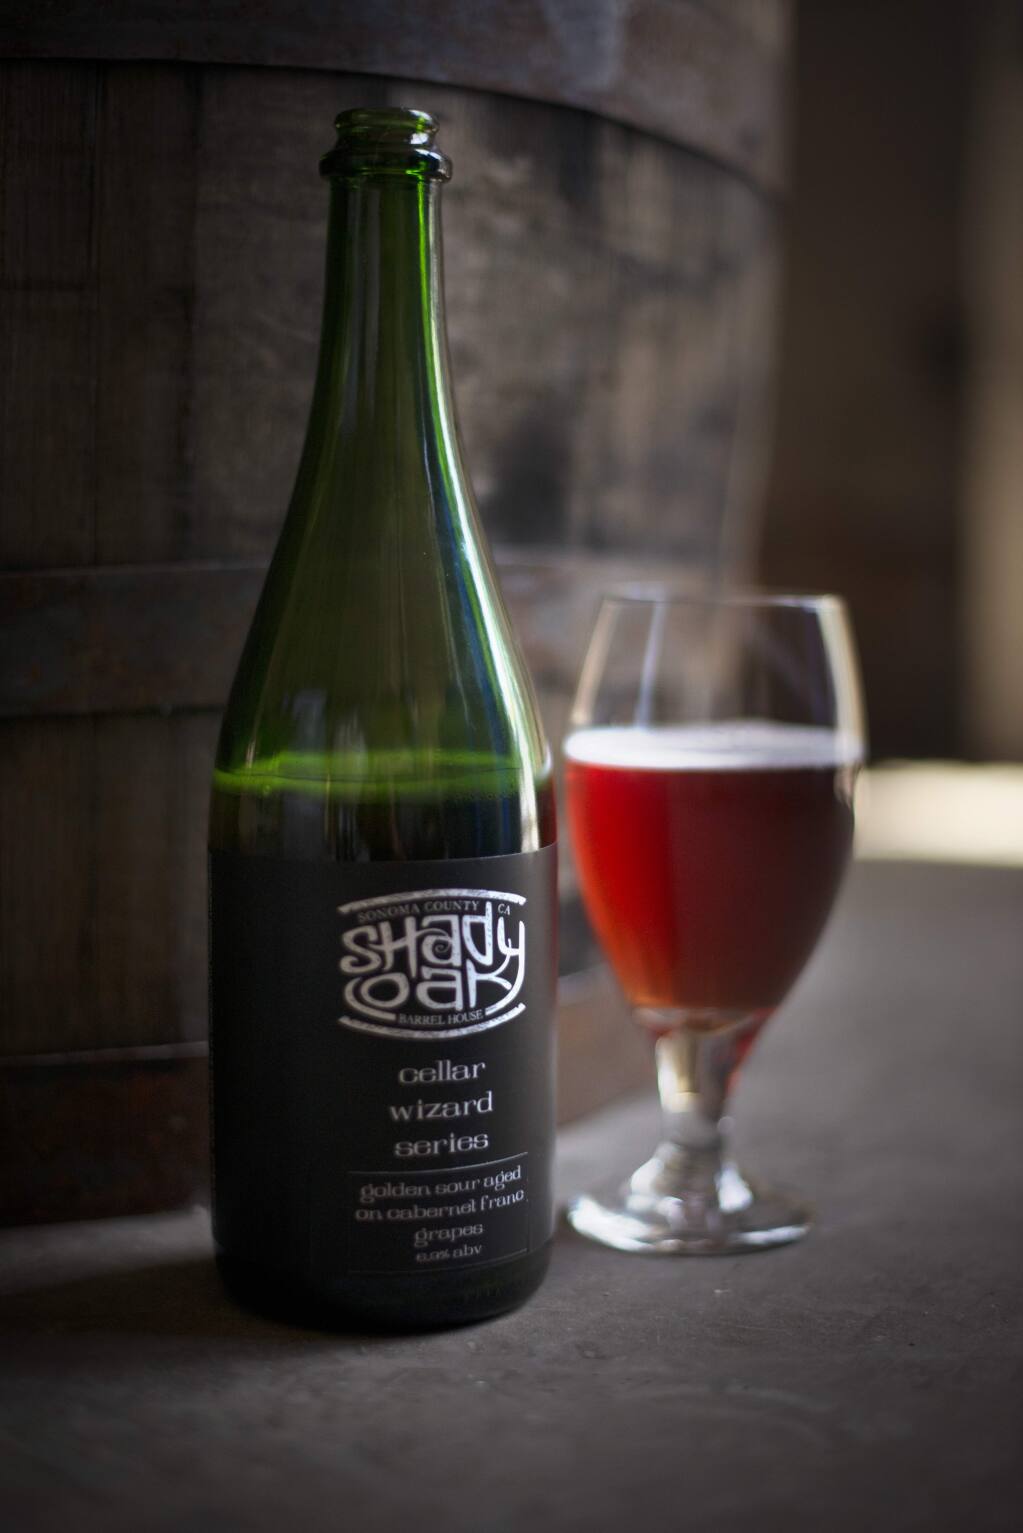 A bottle of Shady Oak Barrel House Cellar Wizard Series of Golden Sour Aged on Cabernet Franc Grapes at the brewery's new location on First Street in downtown Santa Rosa. May 17, 2017. (Photo: Erik Castro/for The Press Democrat)